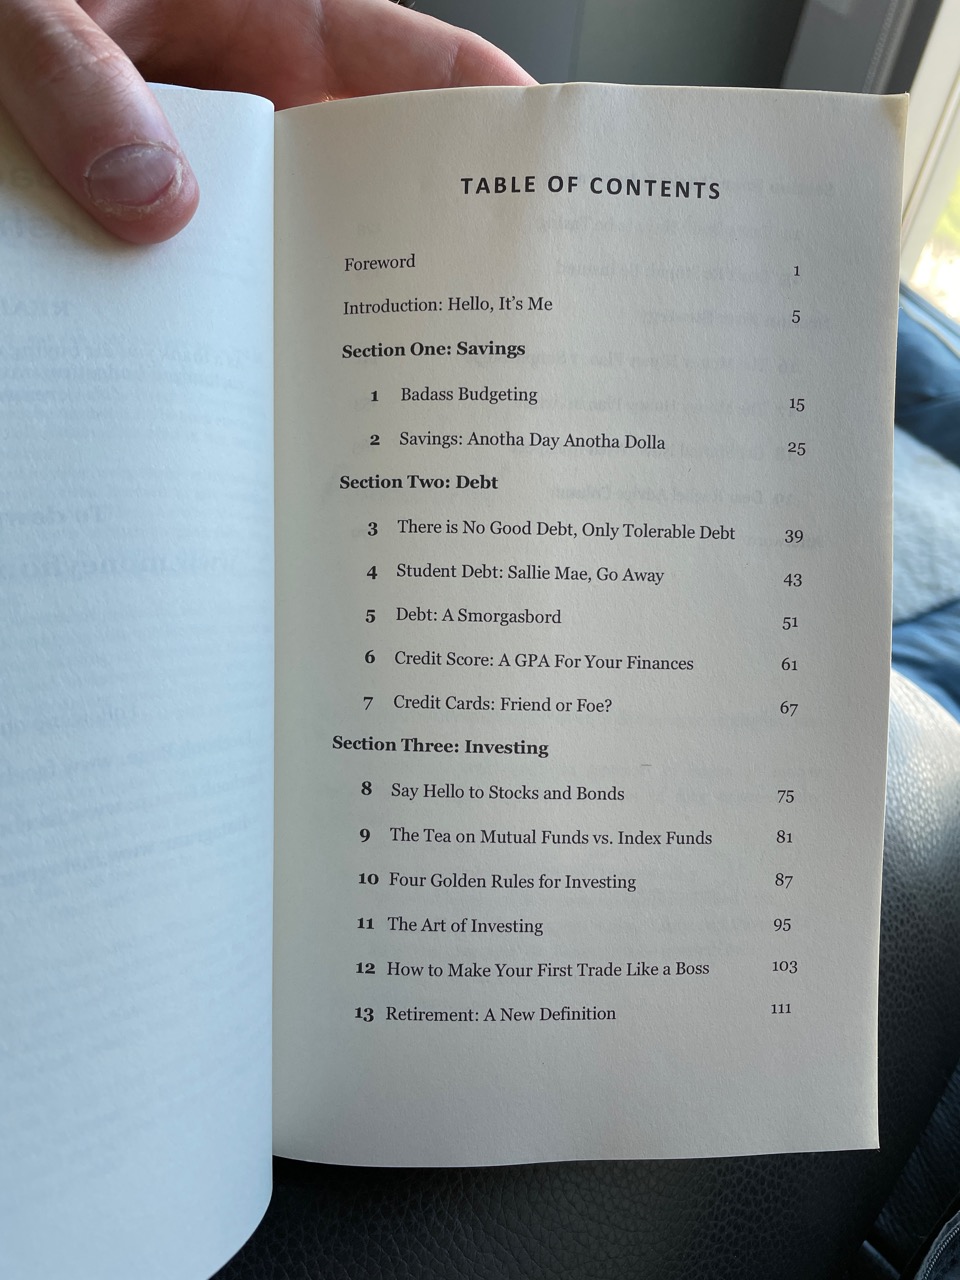 Money Honey table of contents 1 of 2